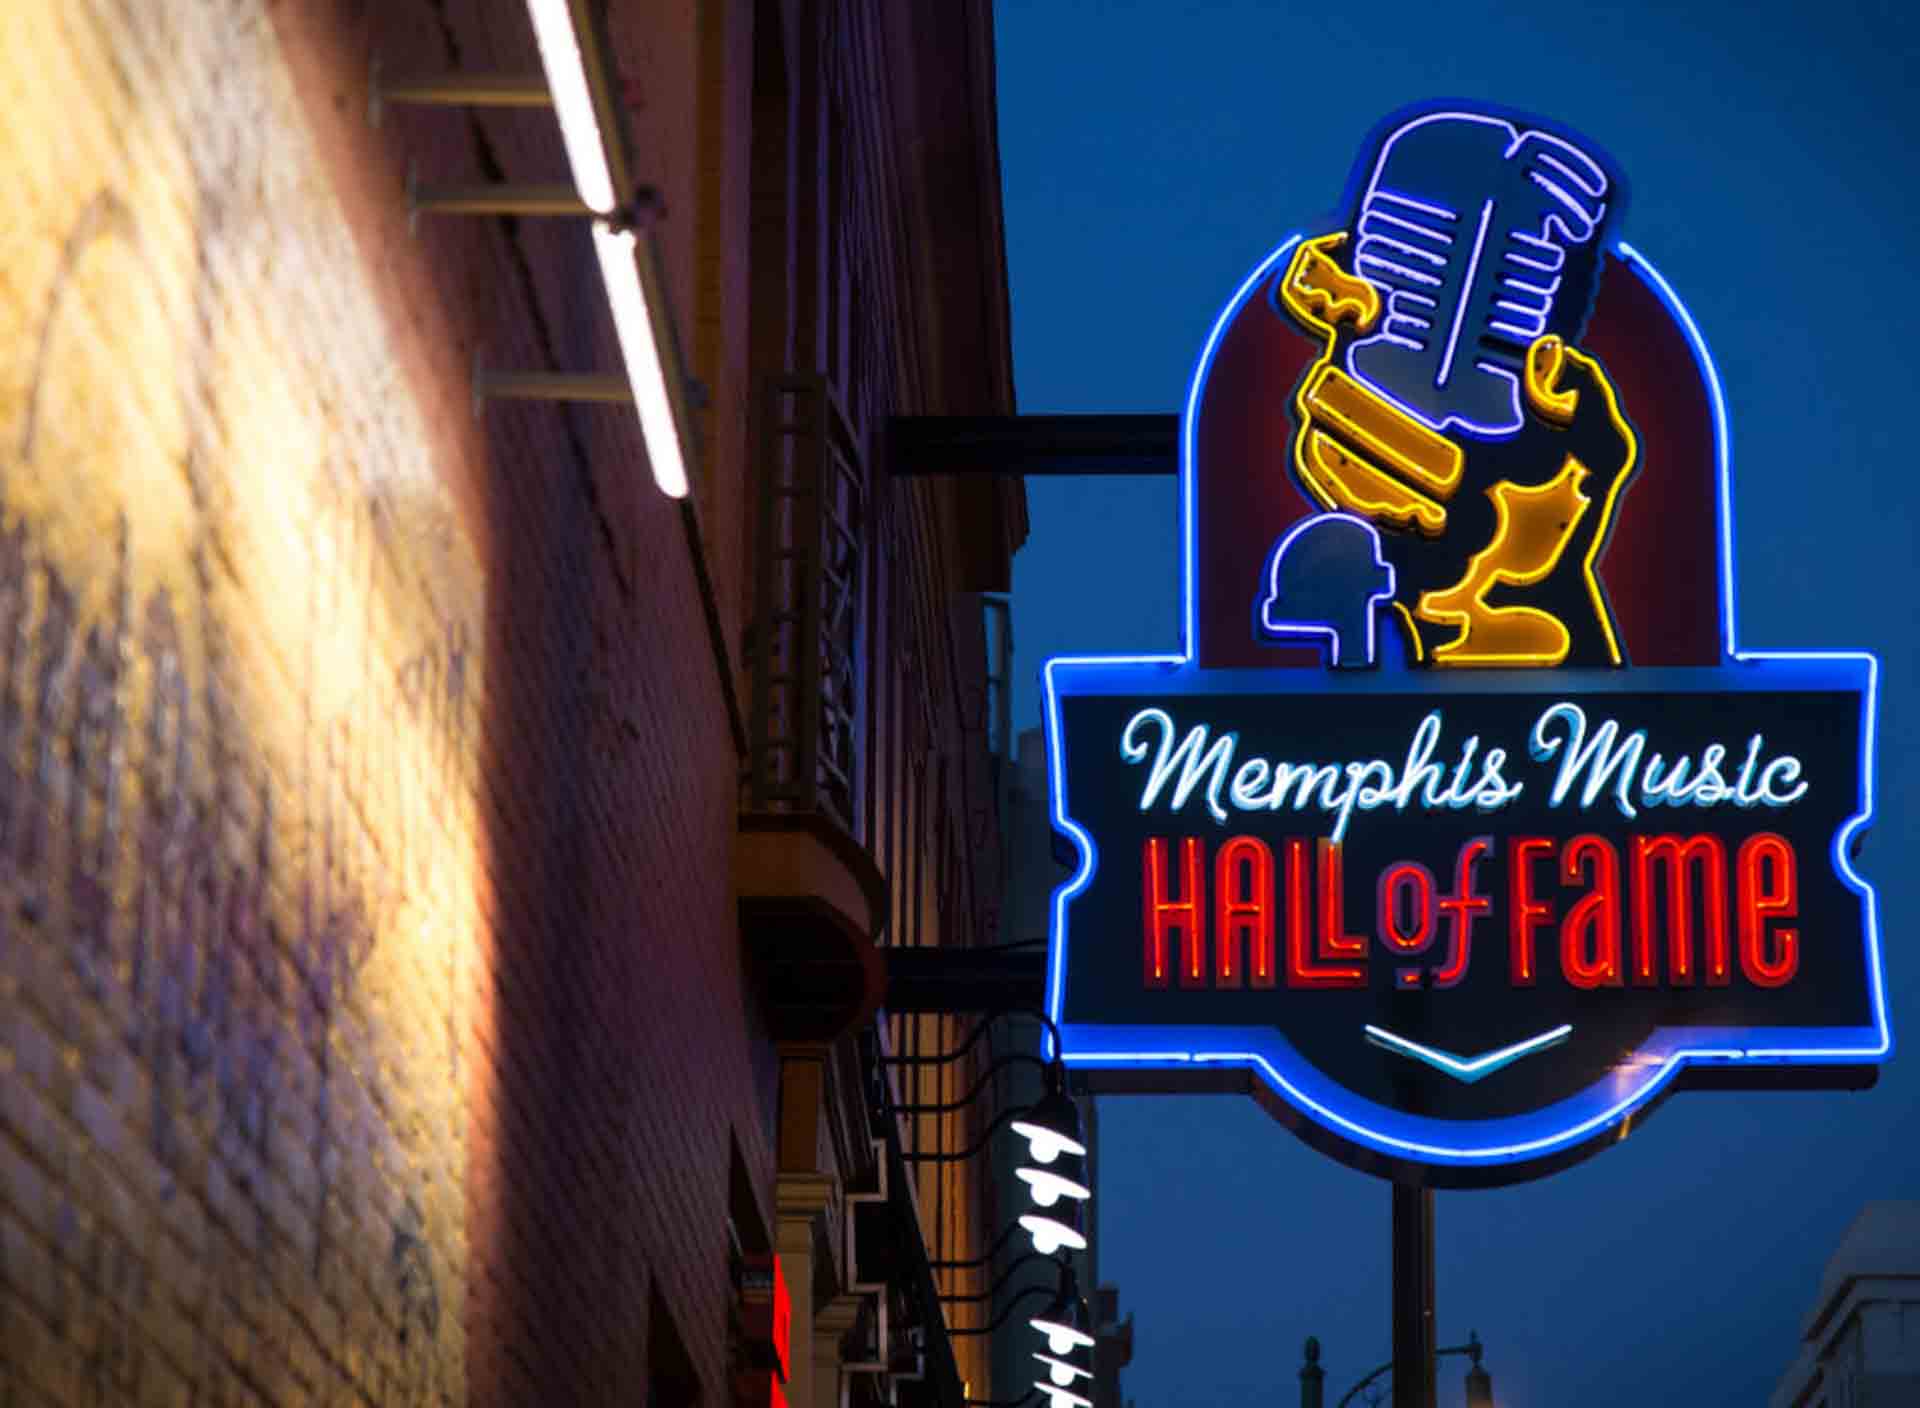 Bobby "Blue" Bland is honored at thMemphis Music Hall of Fame